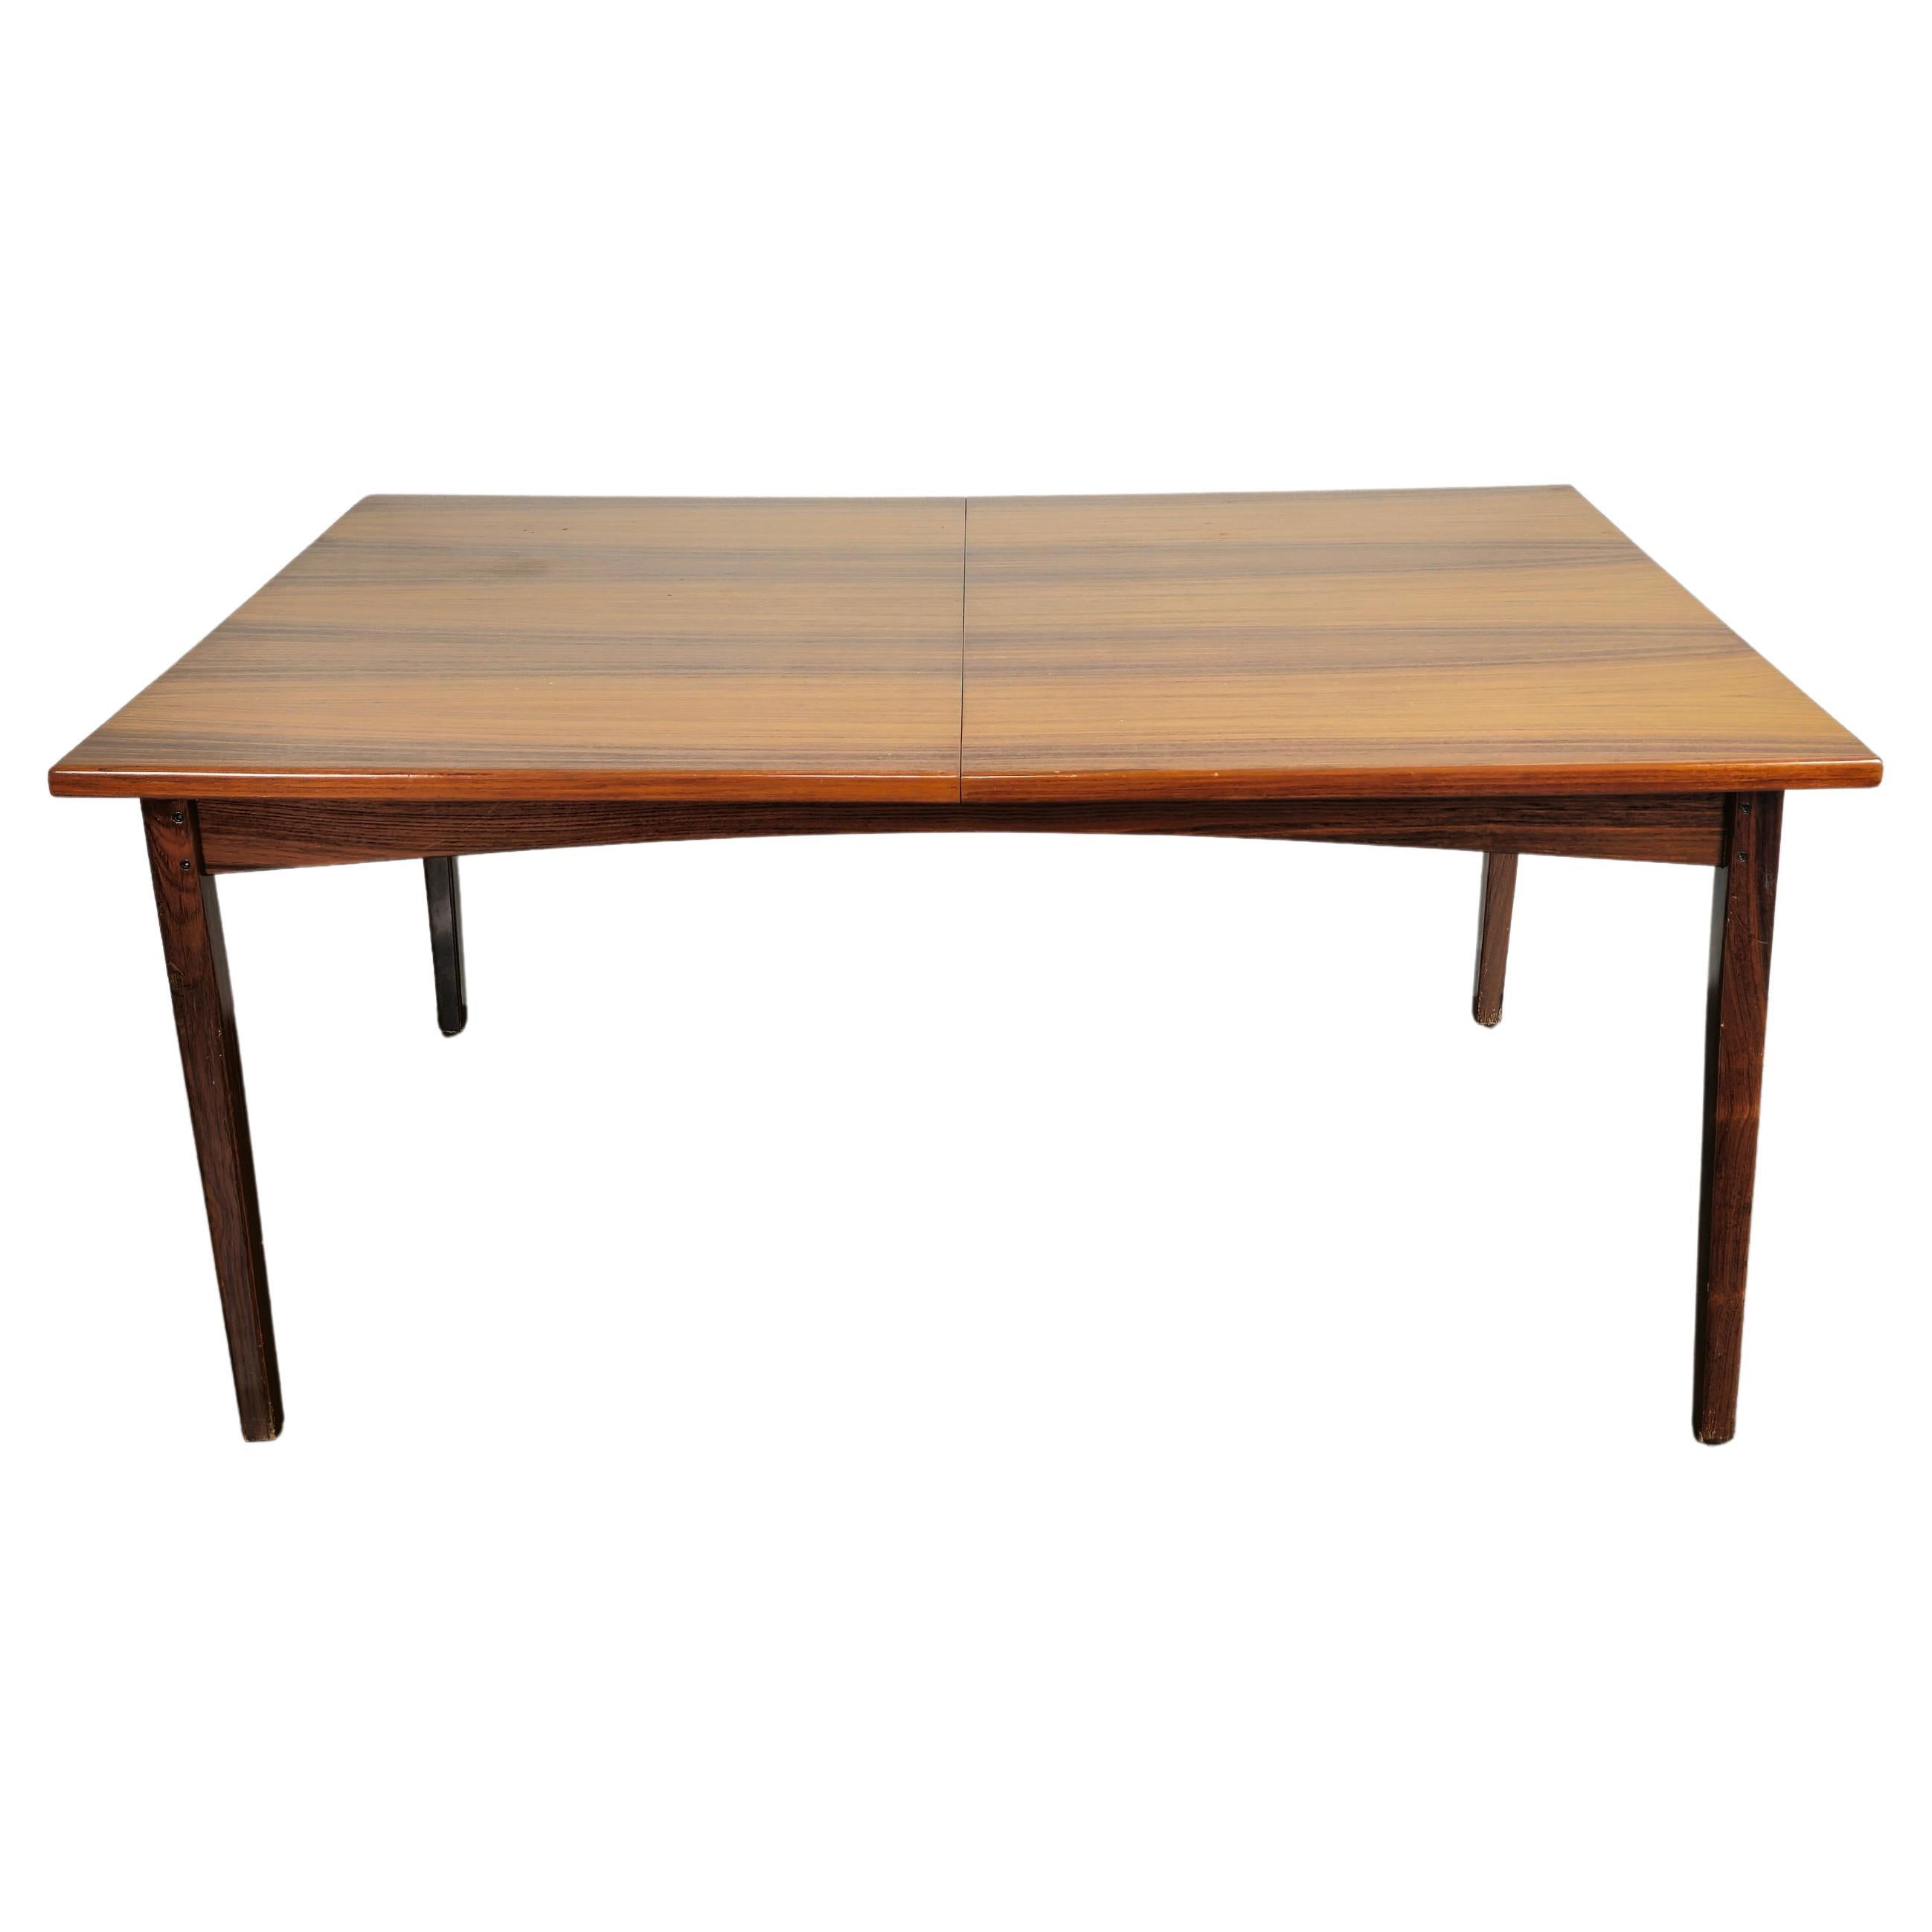 Wood Dining Room Table Extendable Large Rectangular Midcentury, Denmark, 1960s